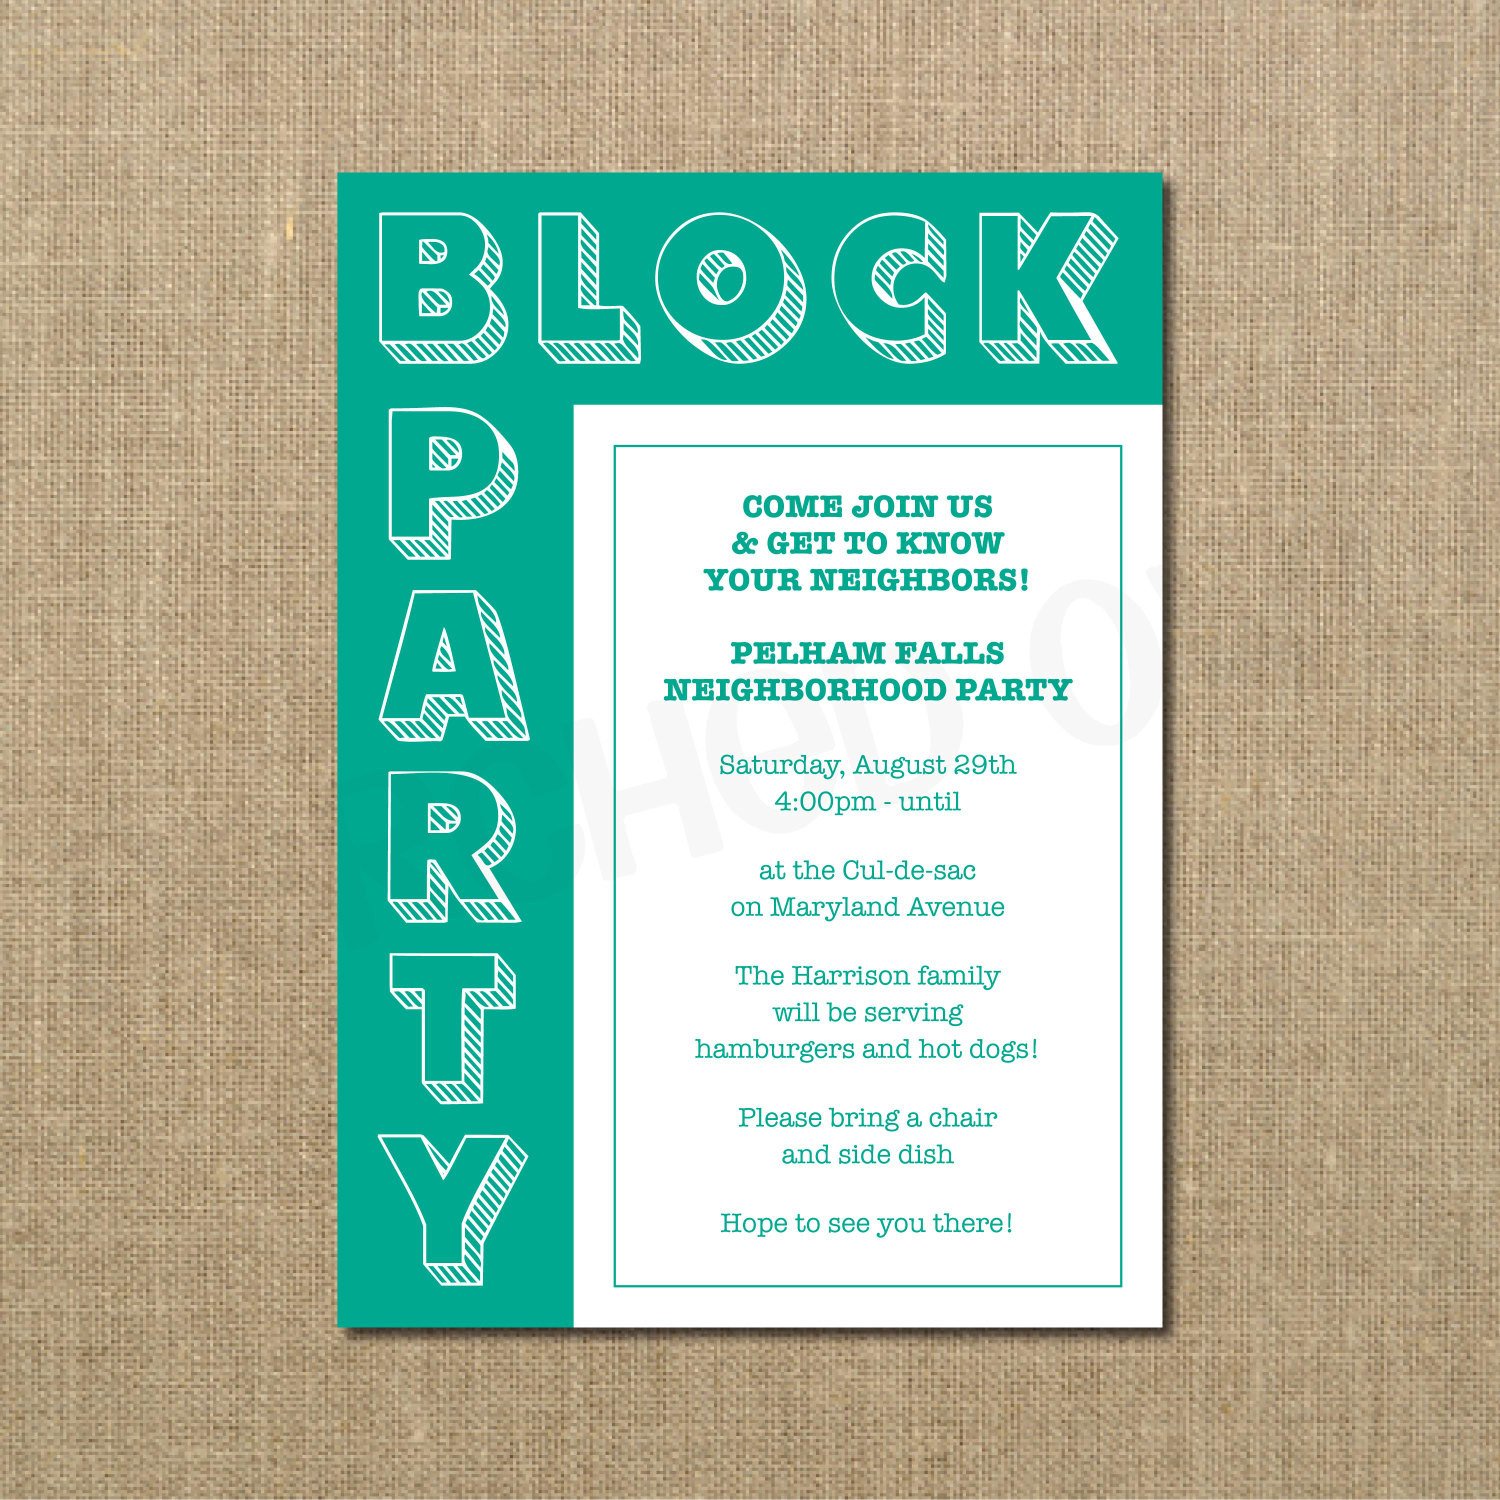 Neighborhood Block Party Cookout Invitation Grilling Out